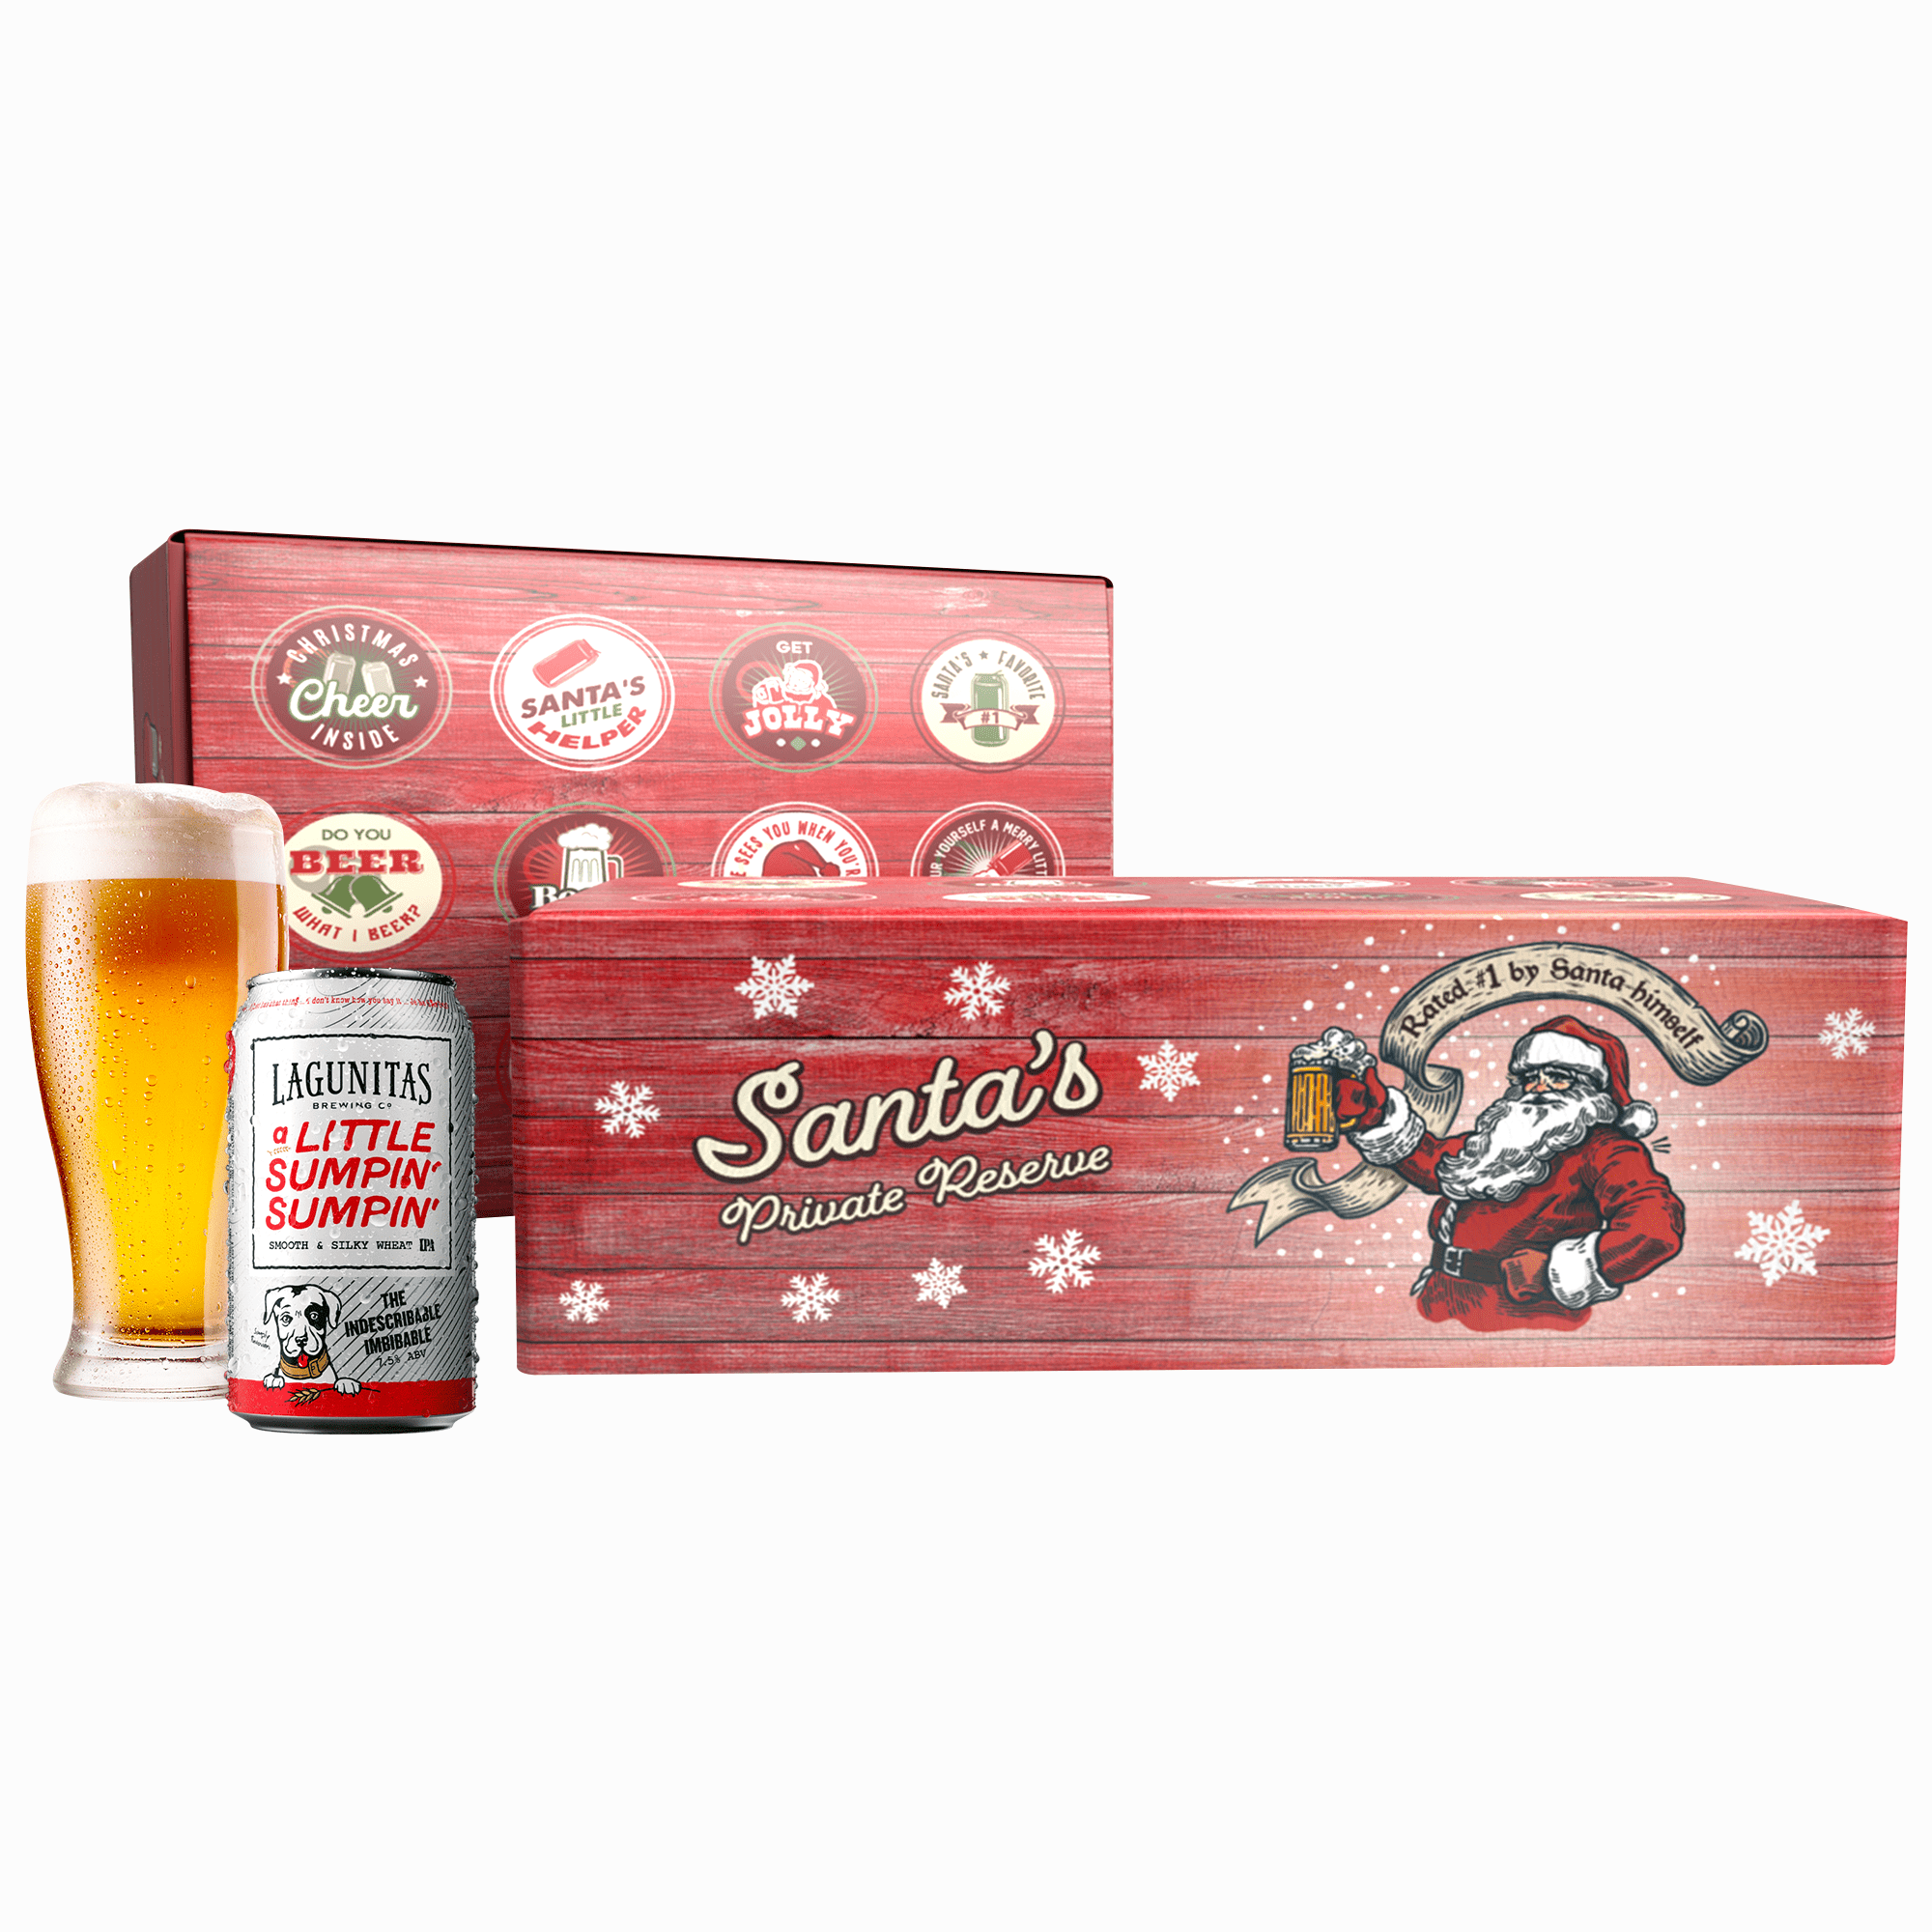 Unique Gifts for Beer Lovers - A Curated Collection